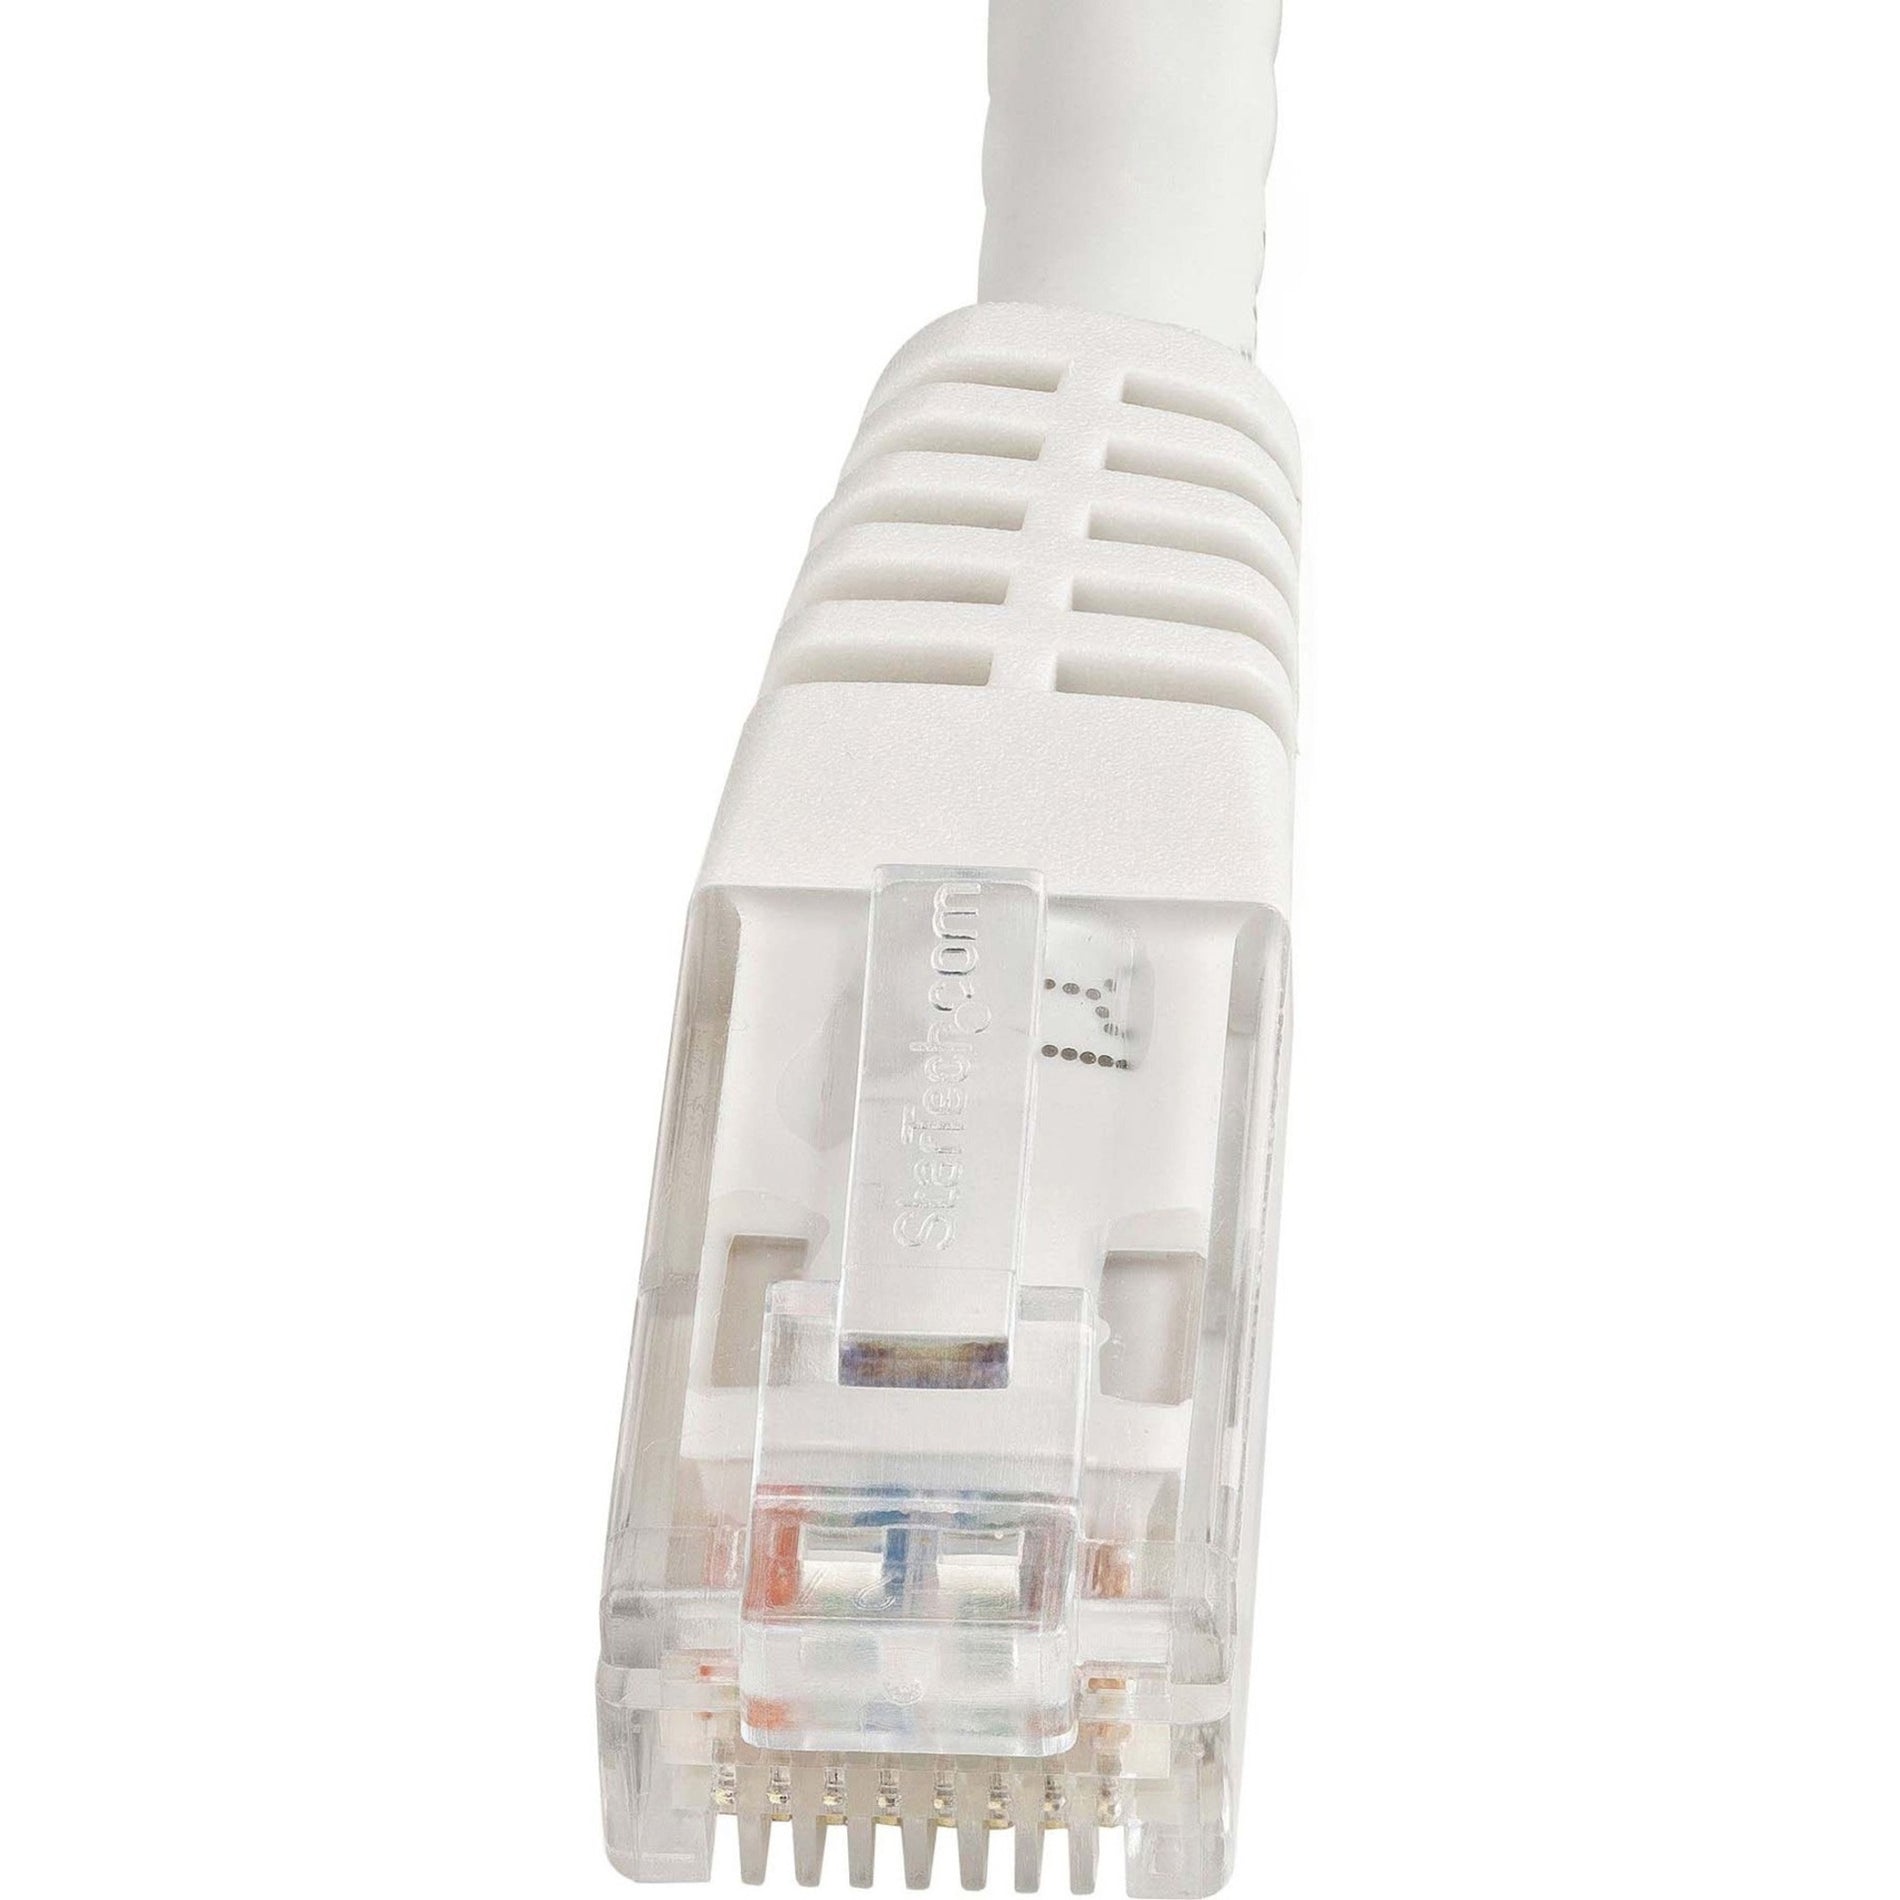 StarTech.com C6PATCH25WH 25ft White Cat6 UTP Patch Cable ETL Verified, 10 Gbit/s Data Transfer Rate, PoE+, Rust Resistant, Fray Resistant, Bend Resistant